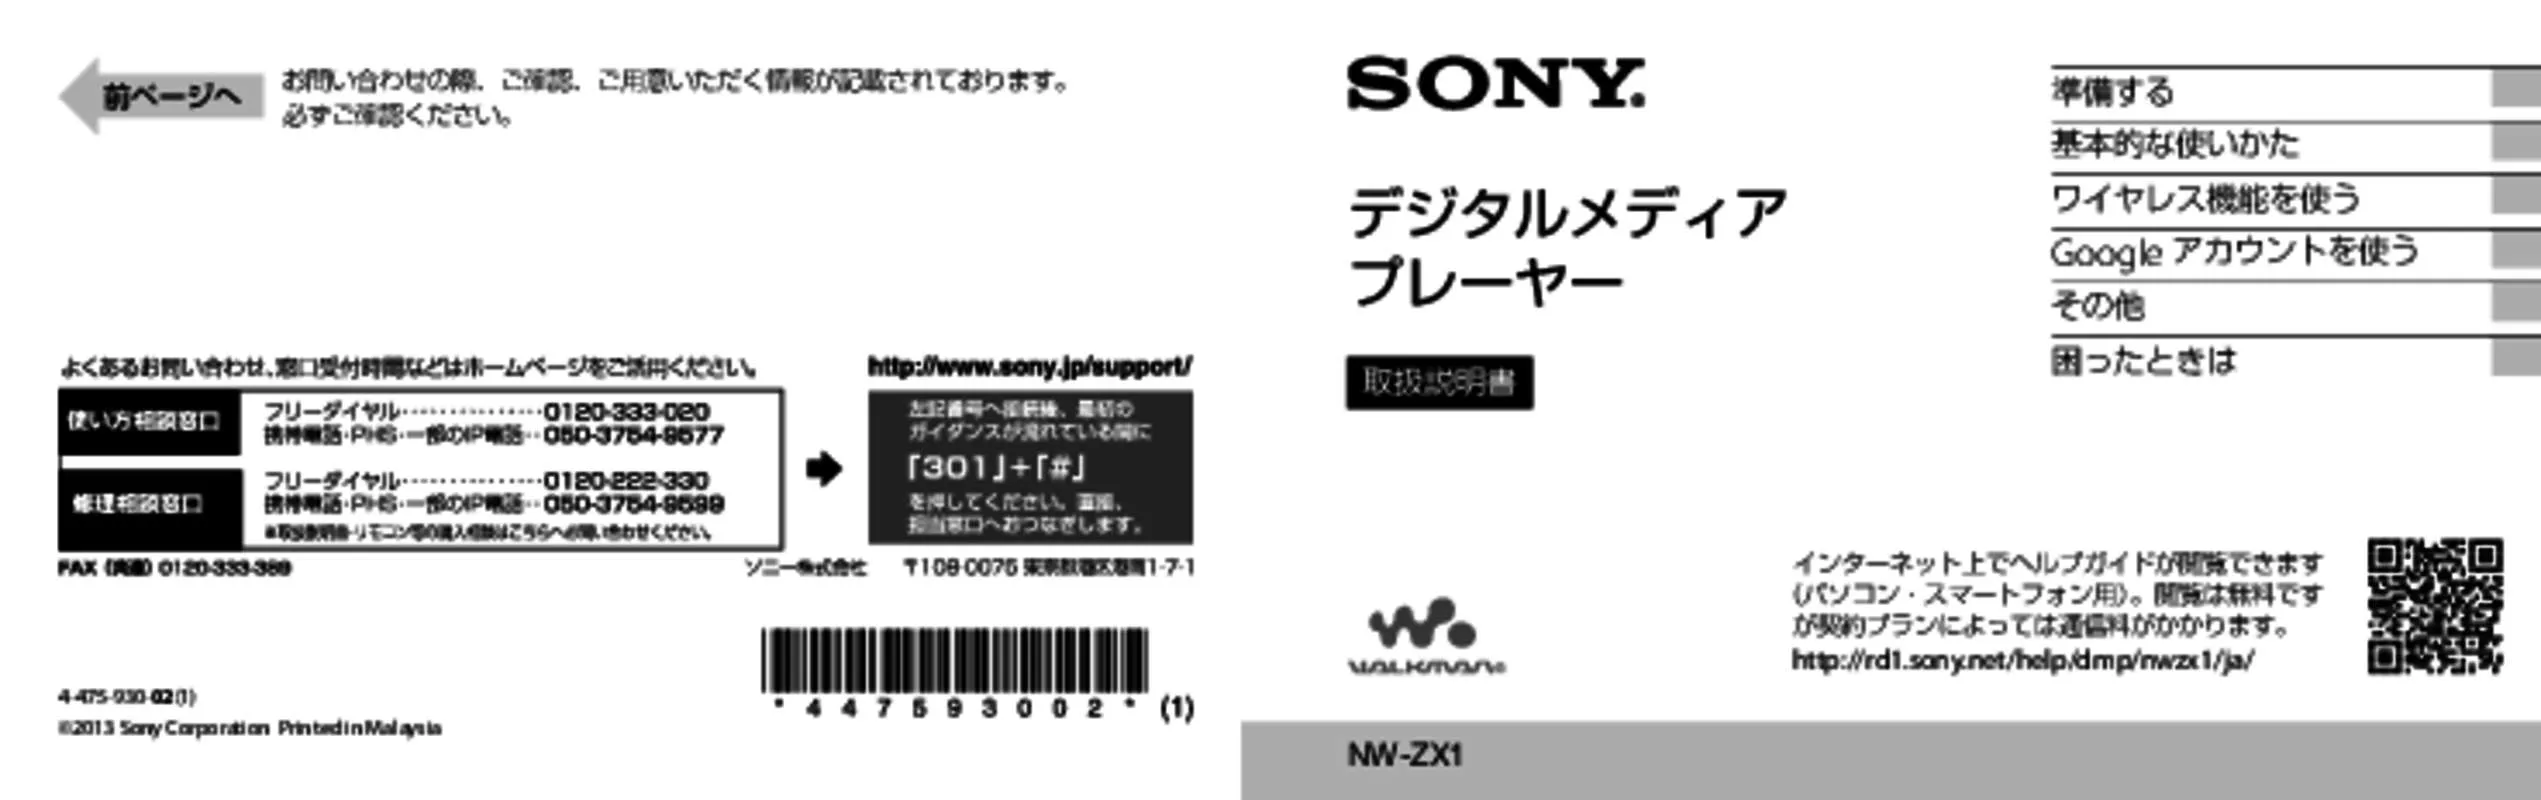 Mode d'emploi SONY NW-ZX1